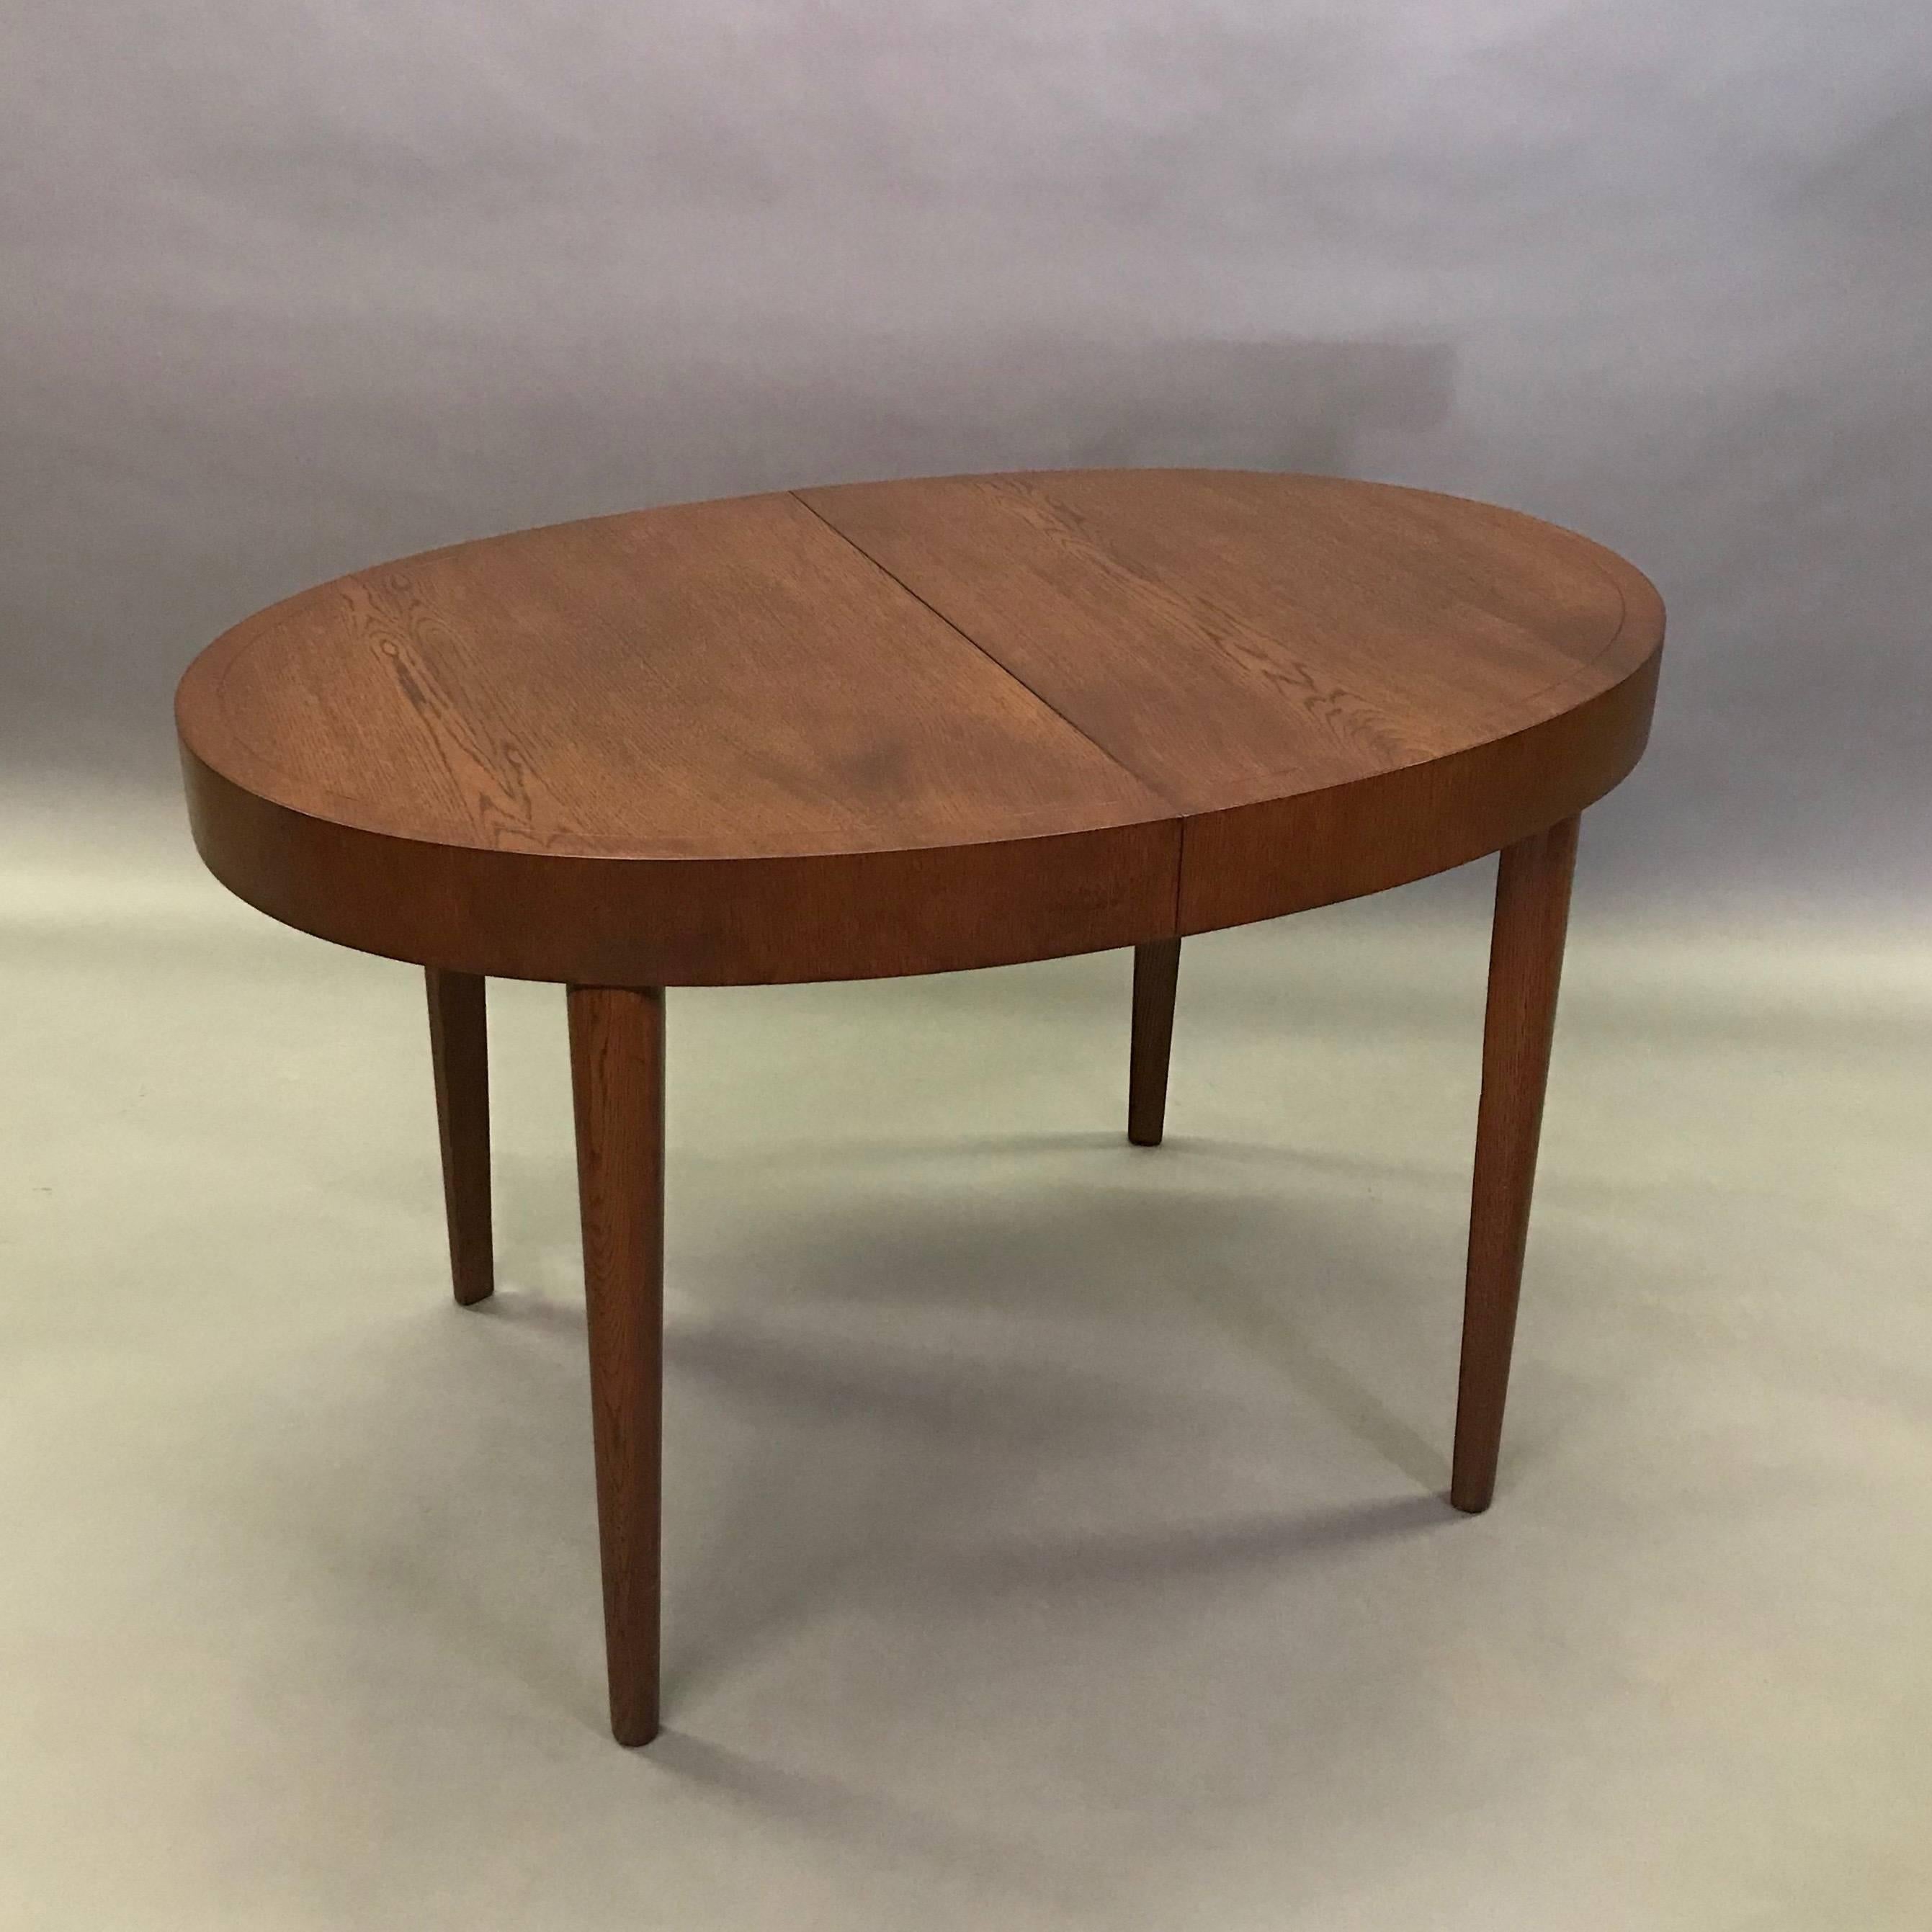 Mid century, oval, walnut stained oak, dining table features a lovely border detail and can extend to accommodate eight people with two 12 inch leaves. The table is 72.25 inches fully extended.